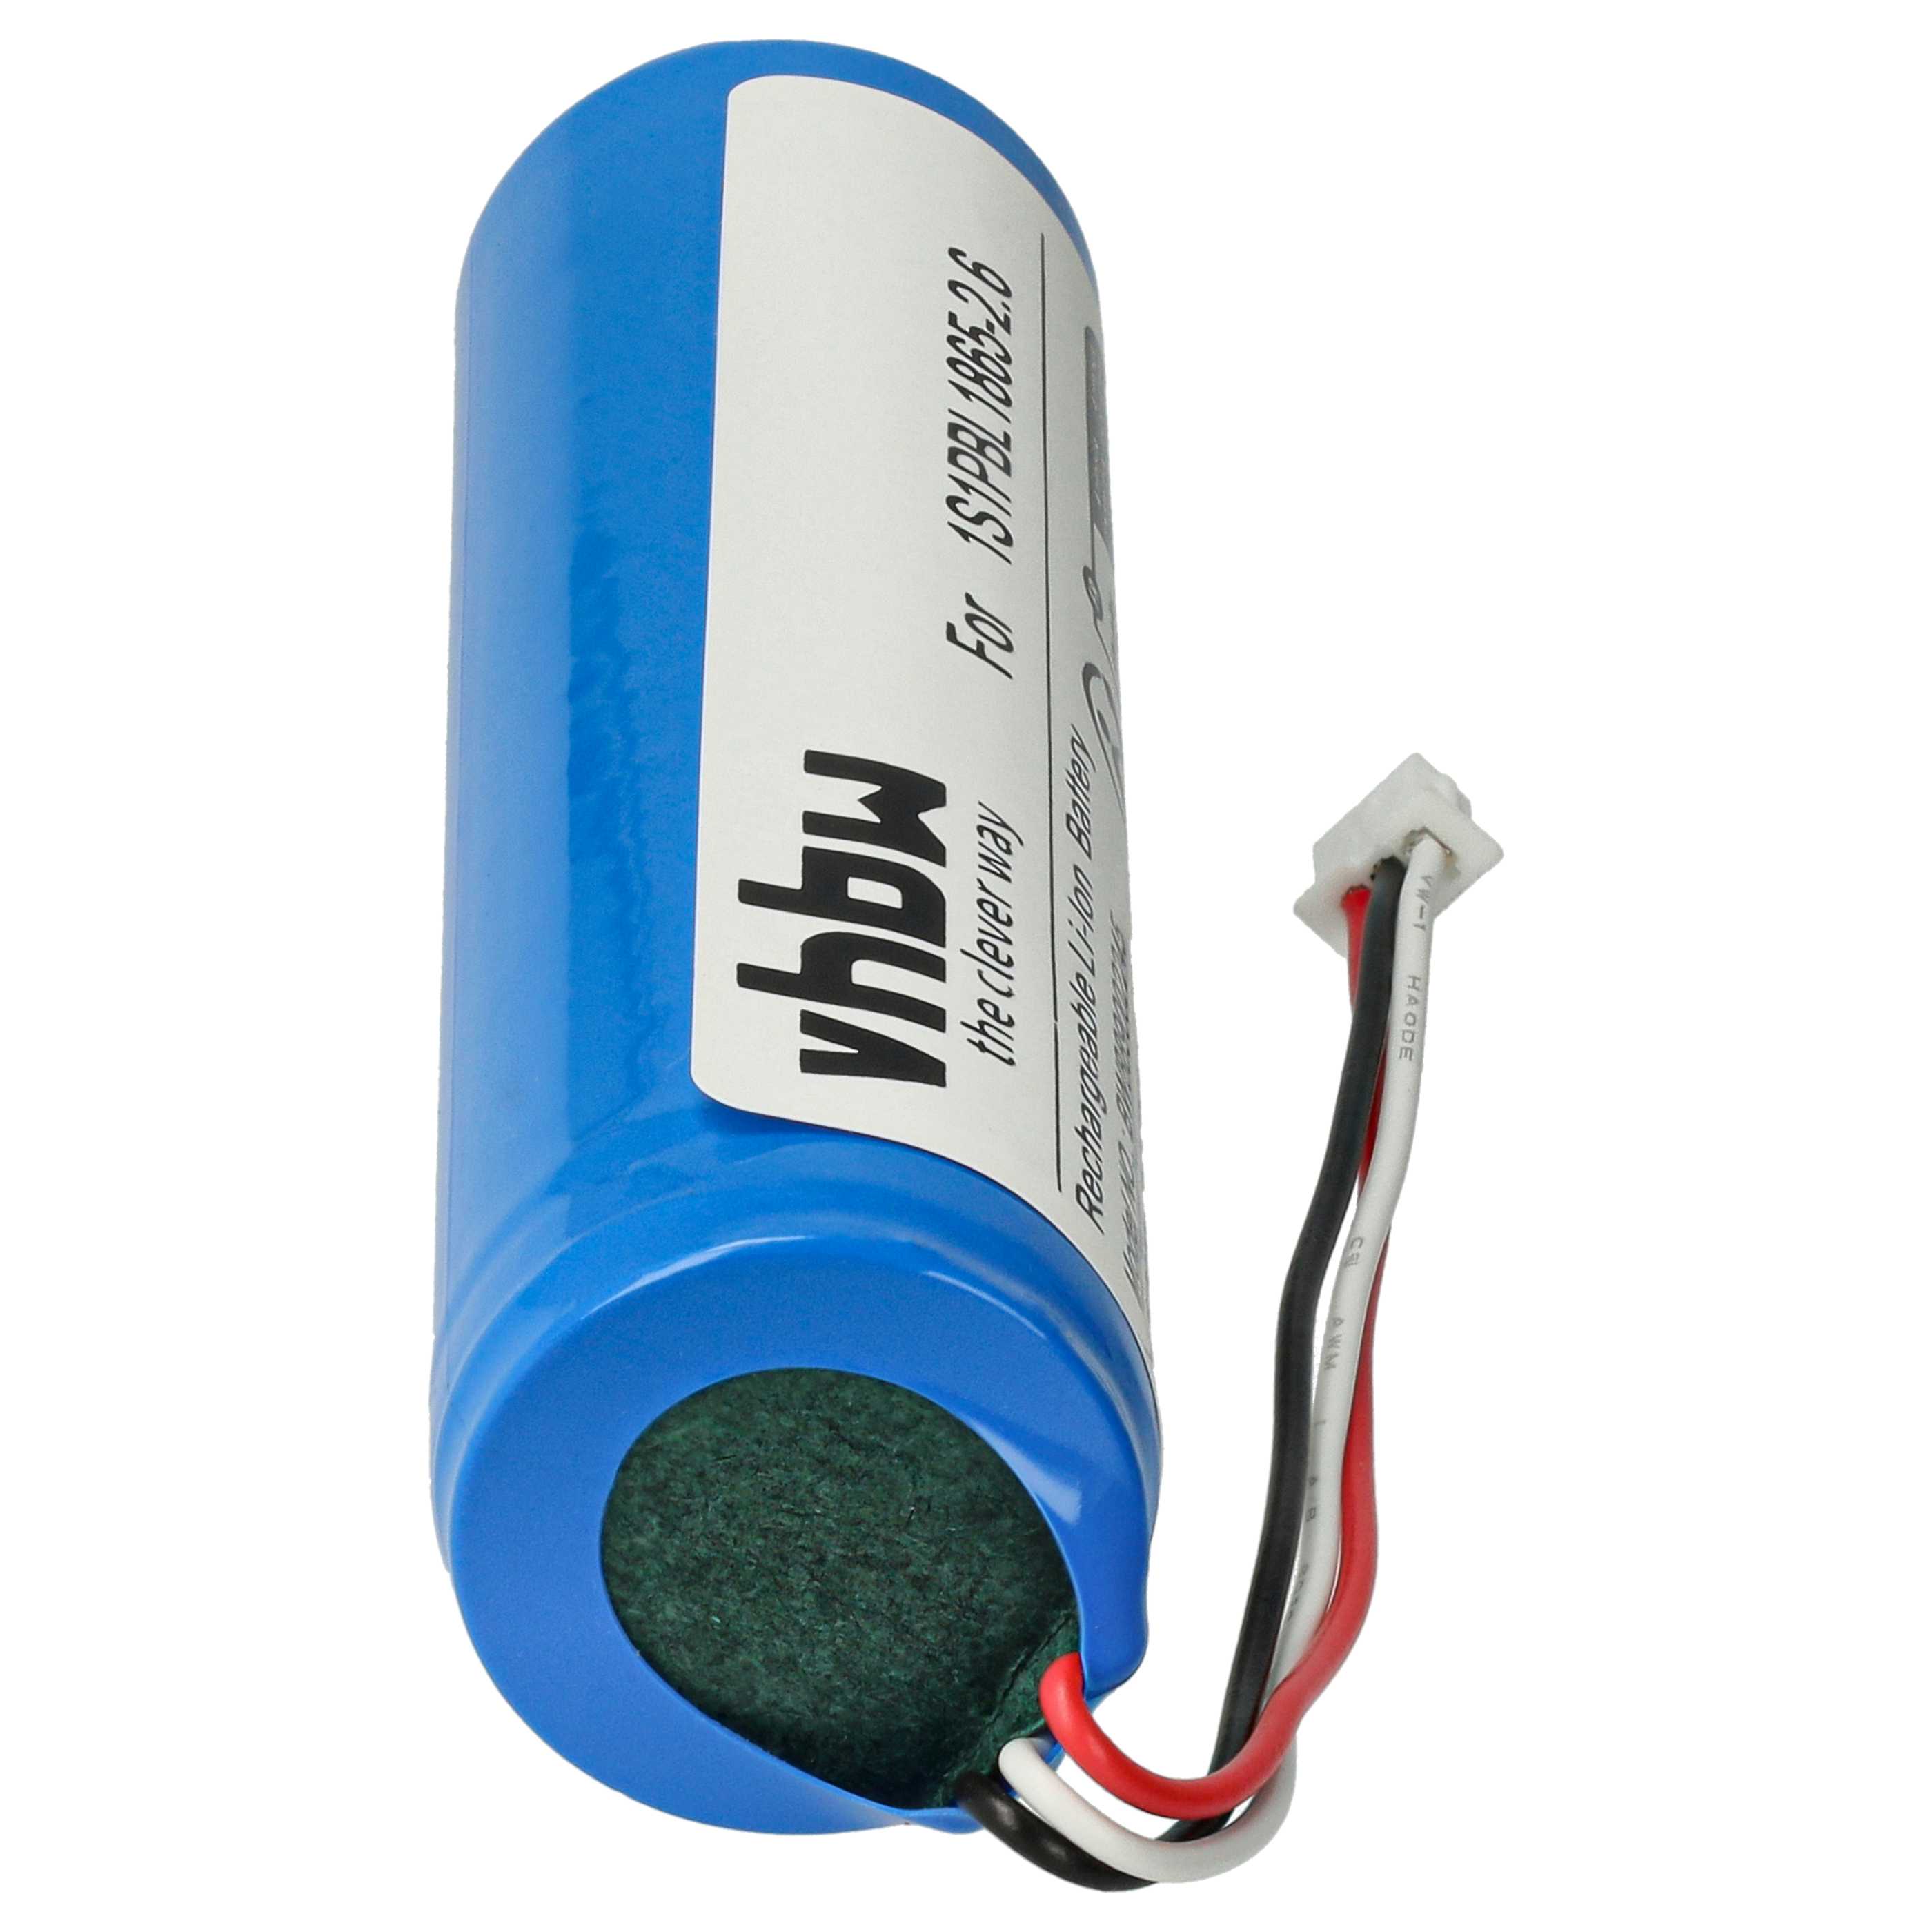 Baby Monitor Battery Replacement for Philips 1S1PBL1865-2.6 - 2600mAh 3.7V Li-Ion